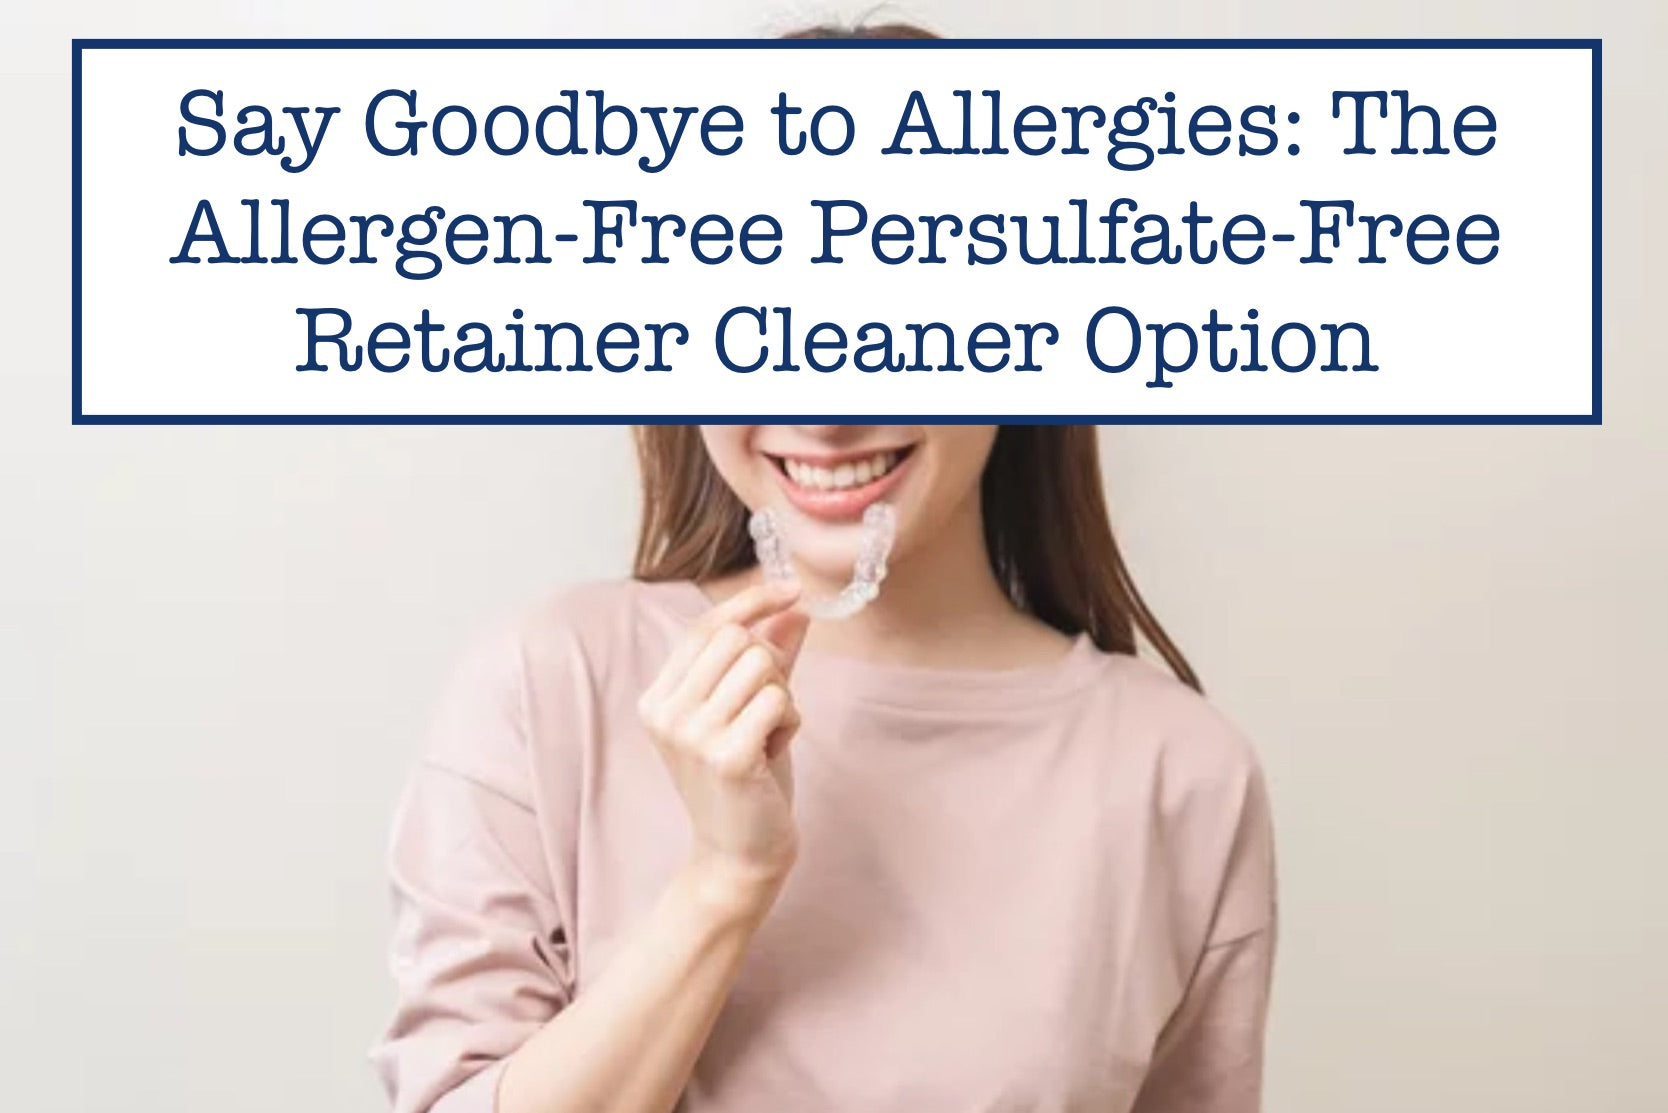 Say Goodbye to Allergies: The Allergen-Free Persulfate-Free Retainer Cleaner Option